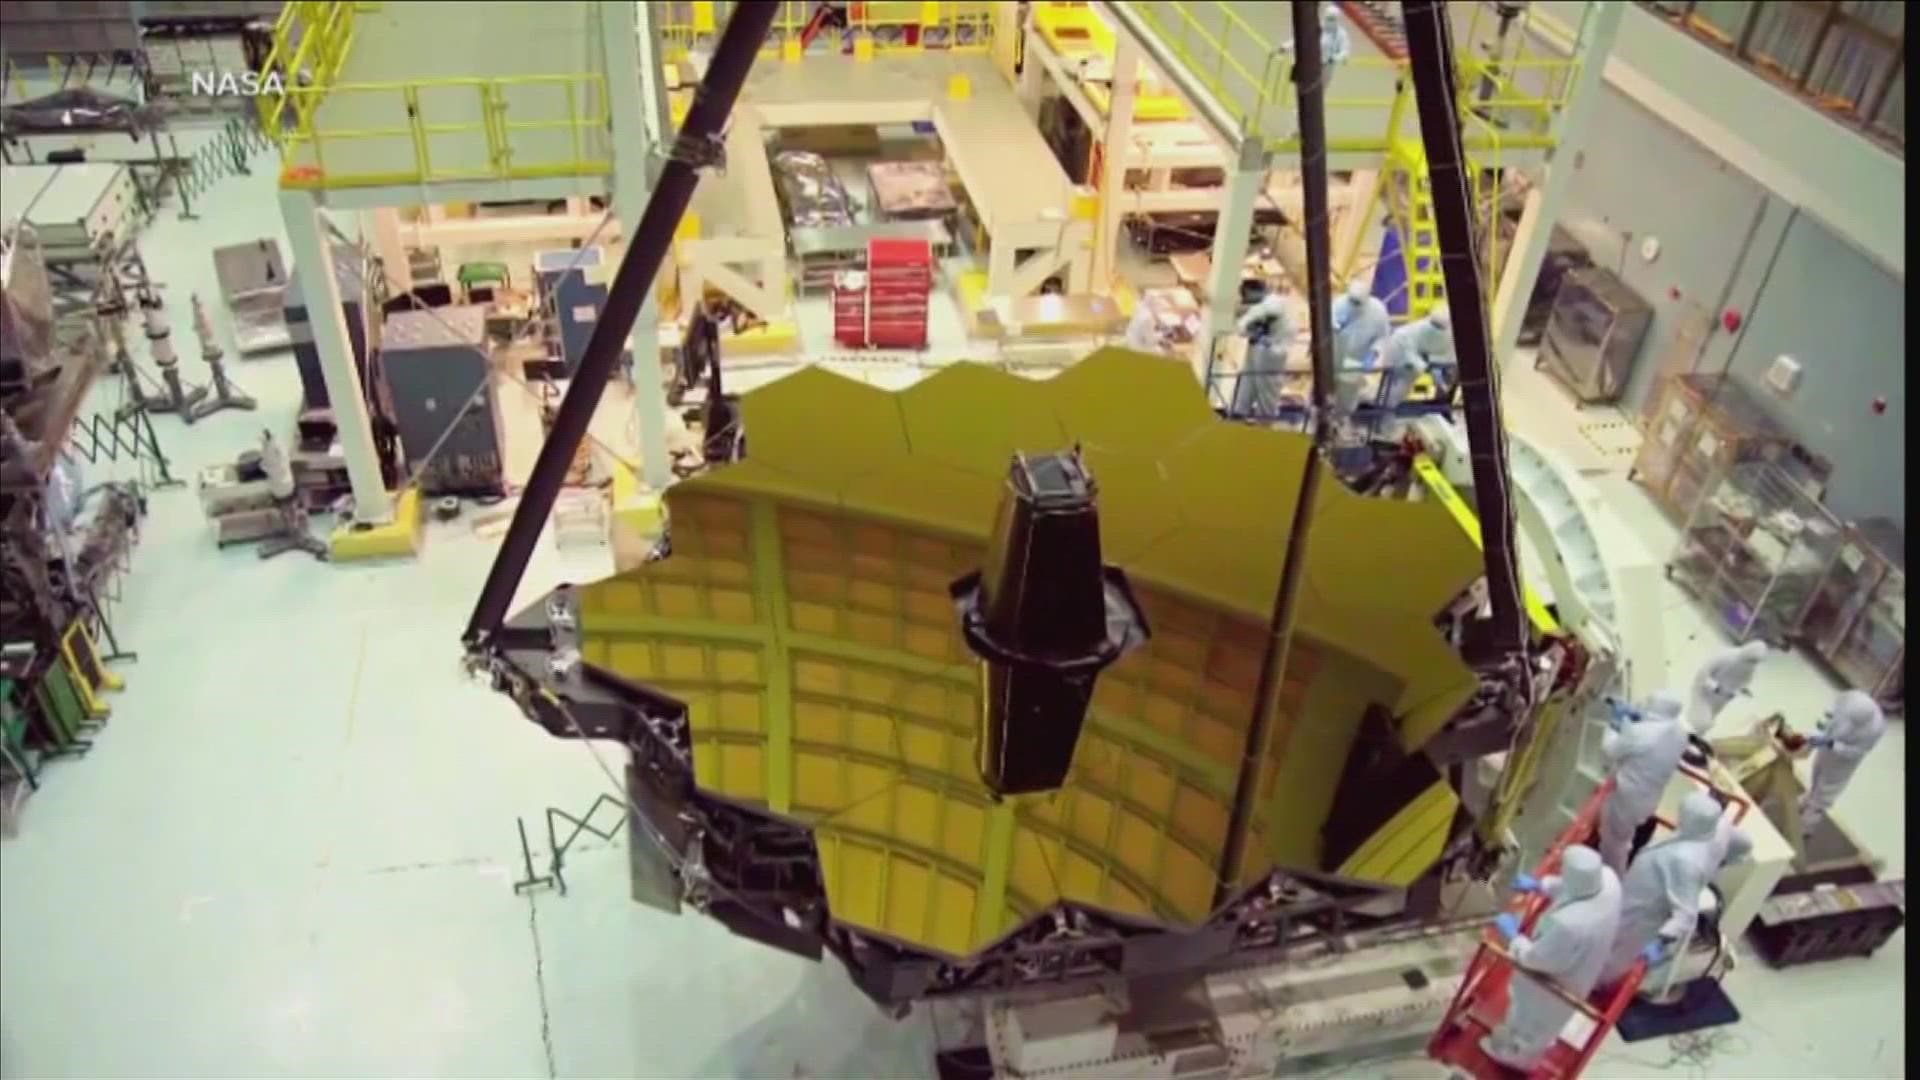 The James Webb Space Telescope is the biggest and most advanced telescope ever, and a U of M assistant professor is one of the lucky few to get to use it.